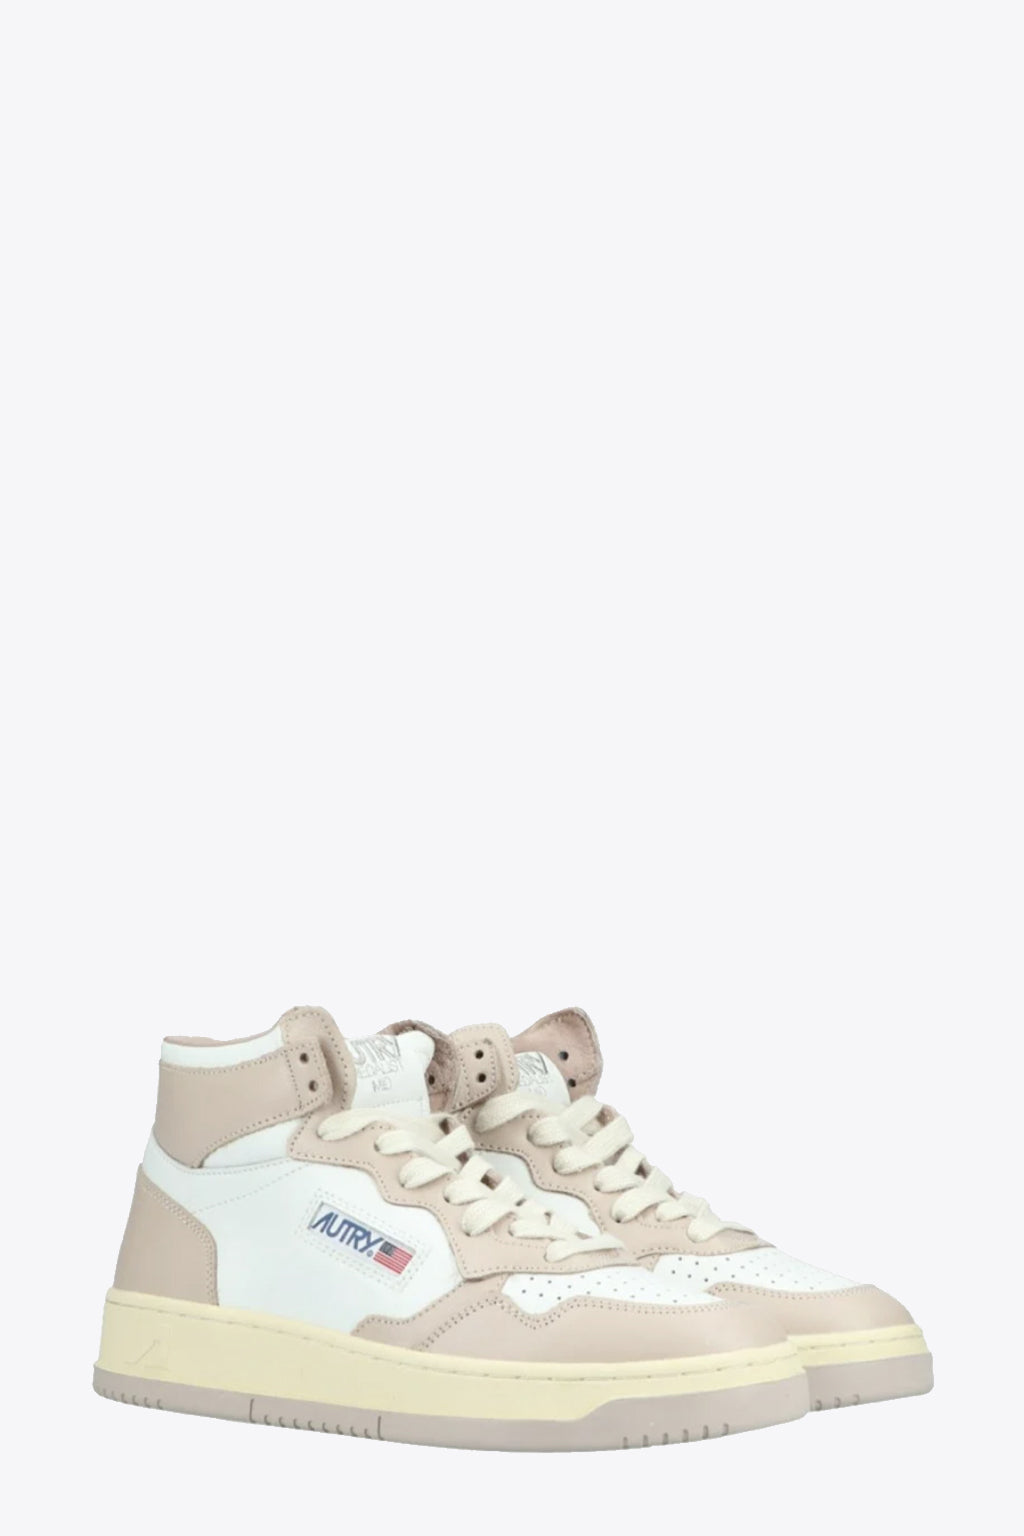 alt-image__White-and-powder-pink-leather-mid-sneaker---Medalist-Mid